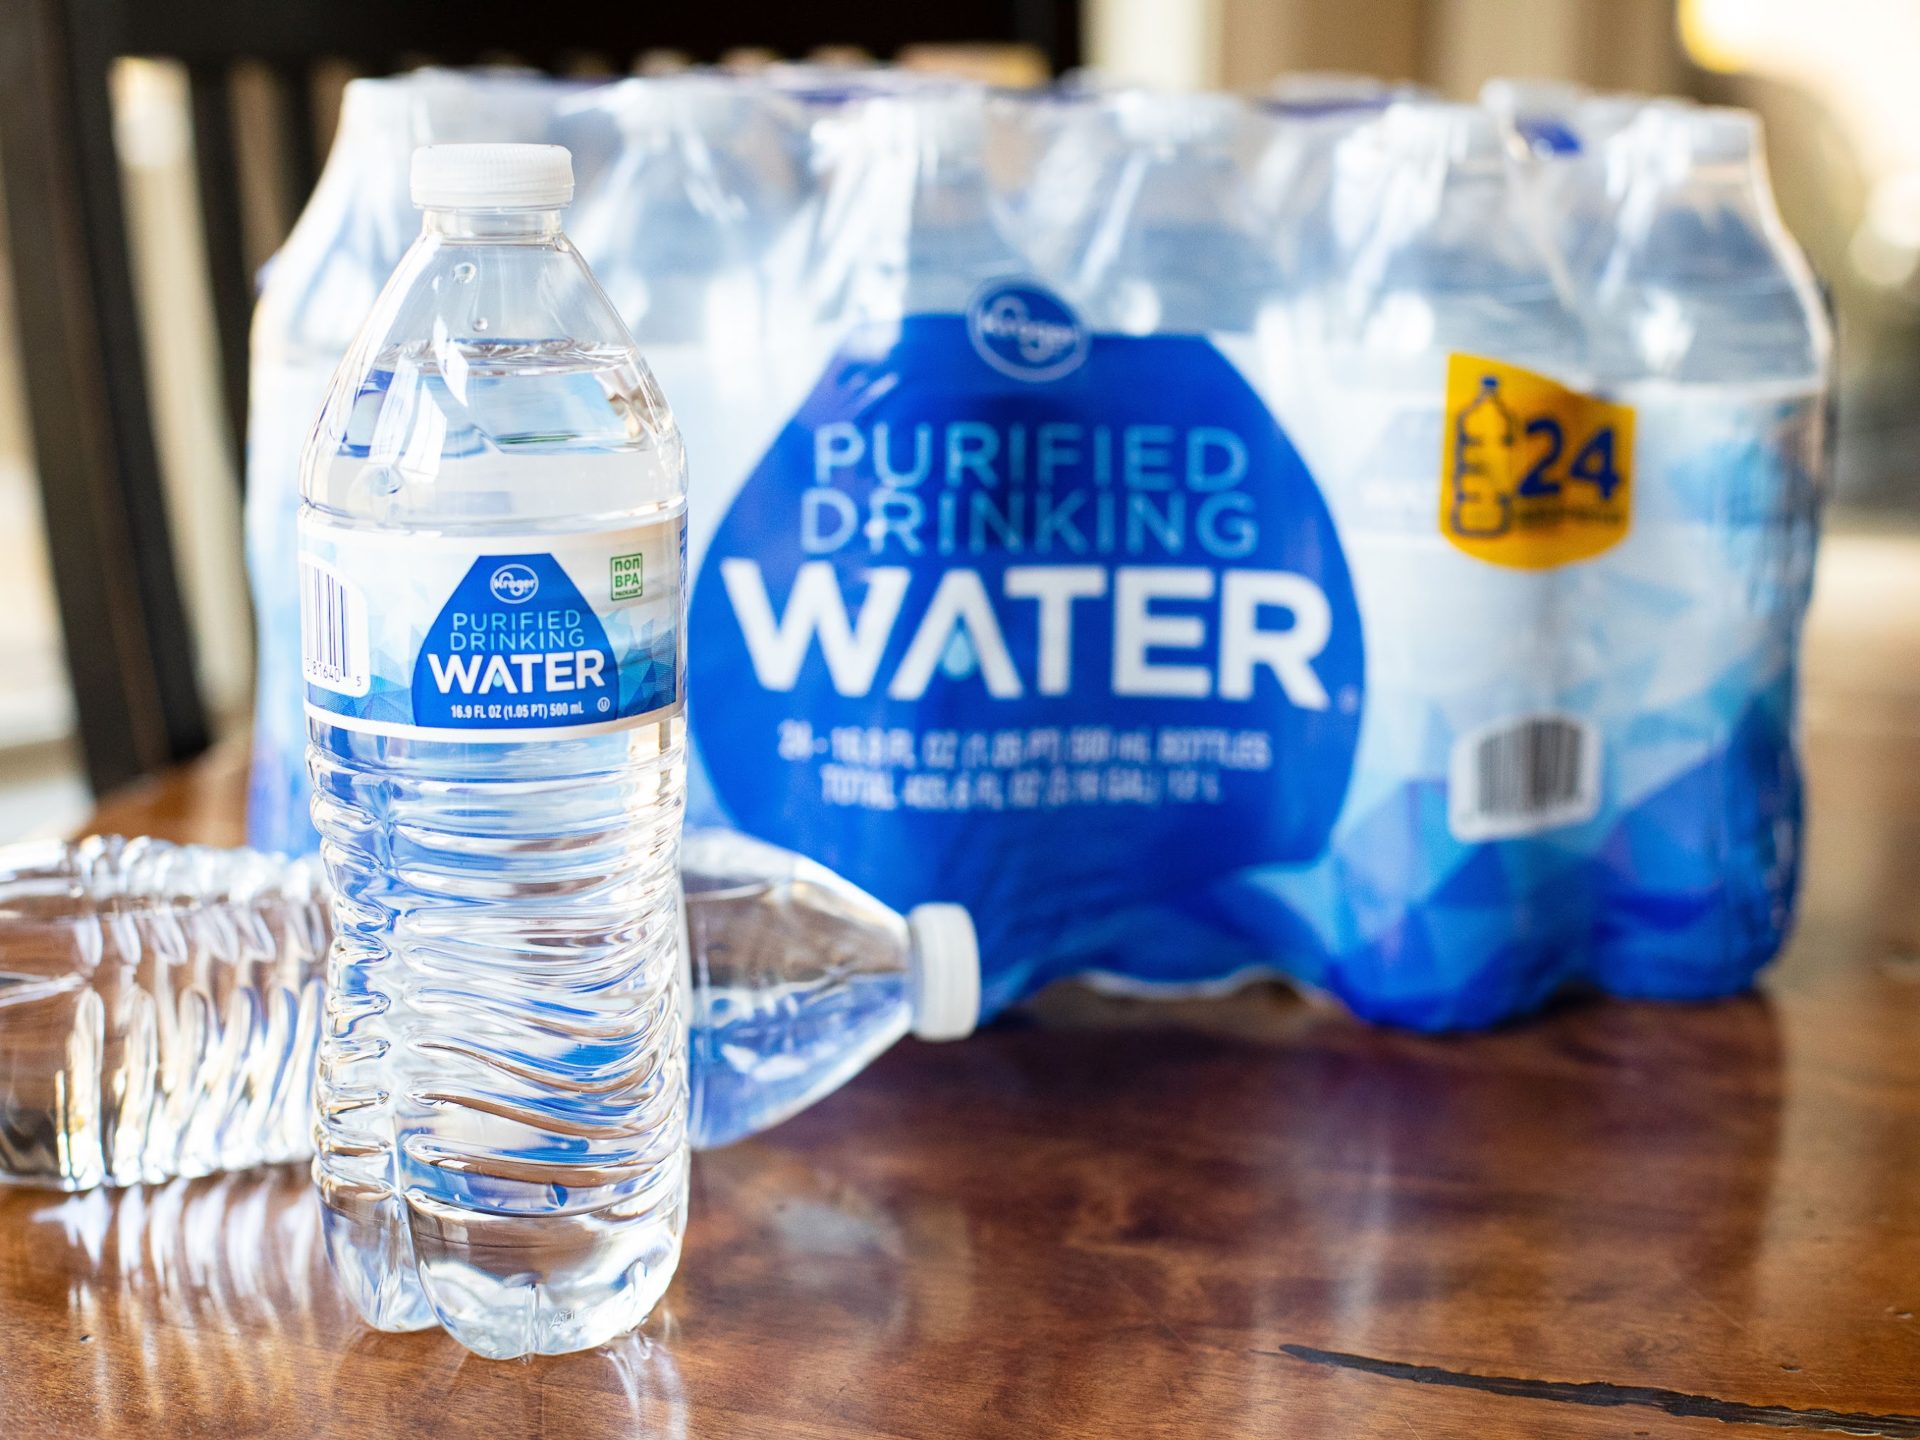 Kroger Purified Drinking Water 24-Pack Just $2.49 At Kroger